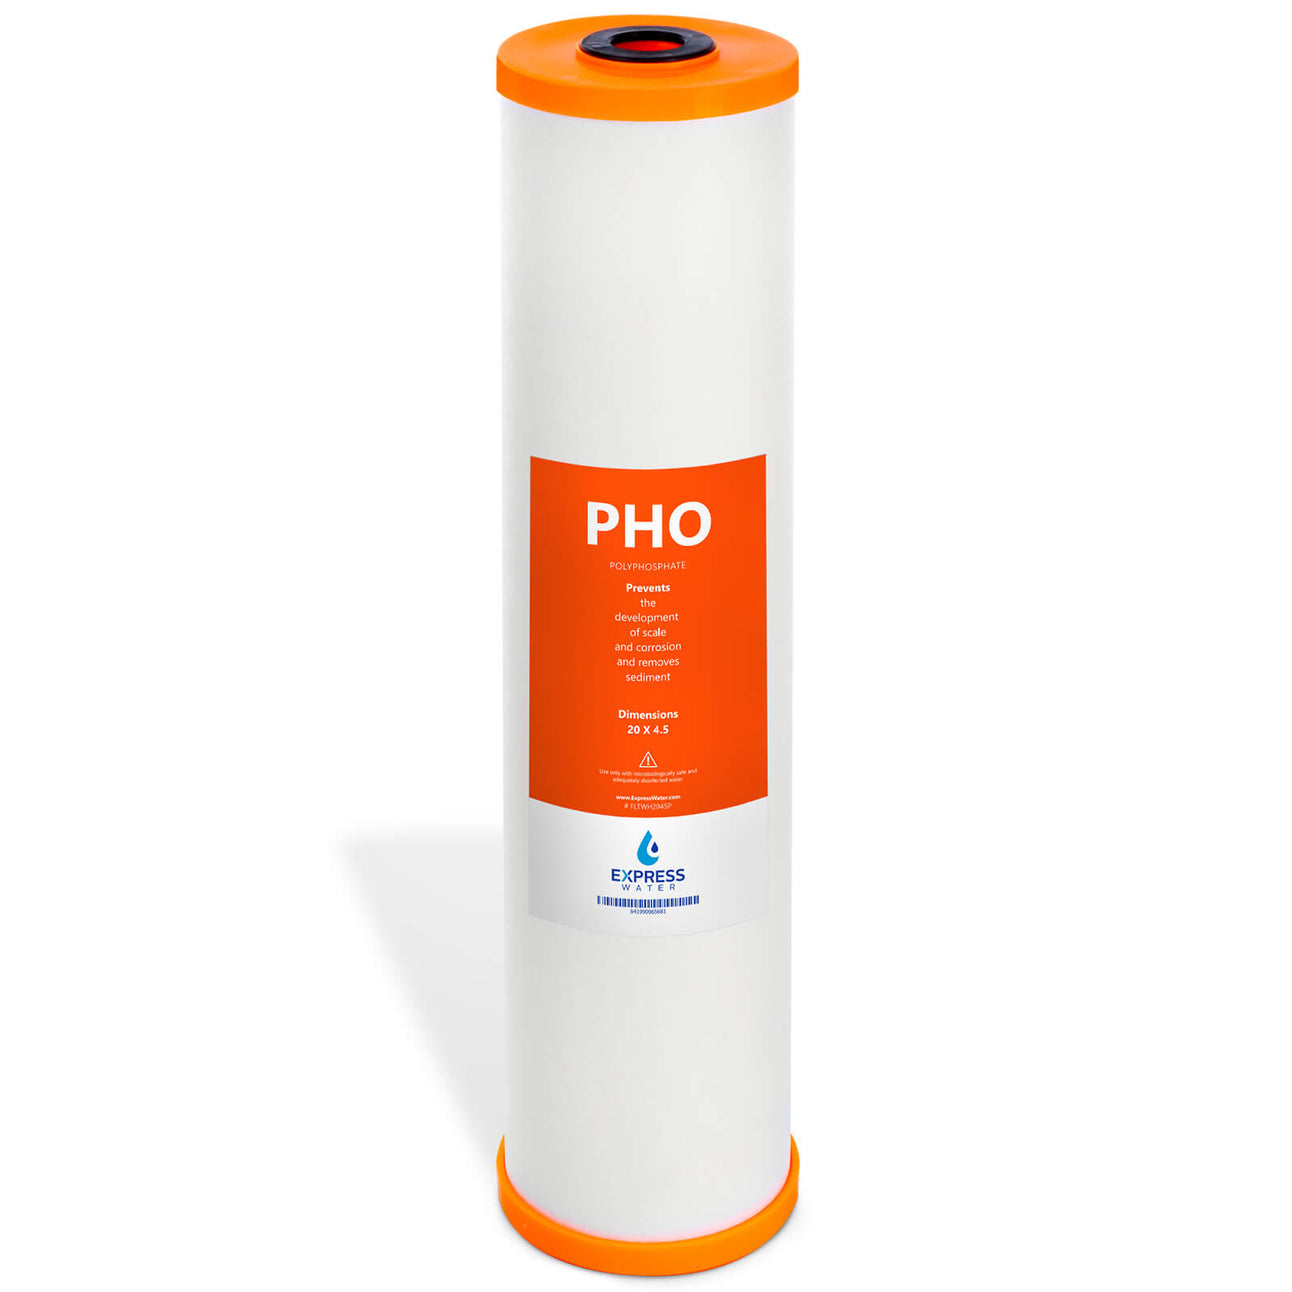 Polyphosphate Whole House Water Filter